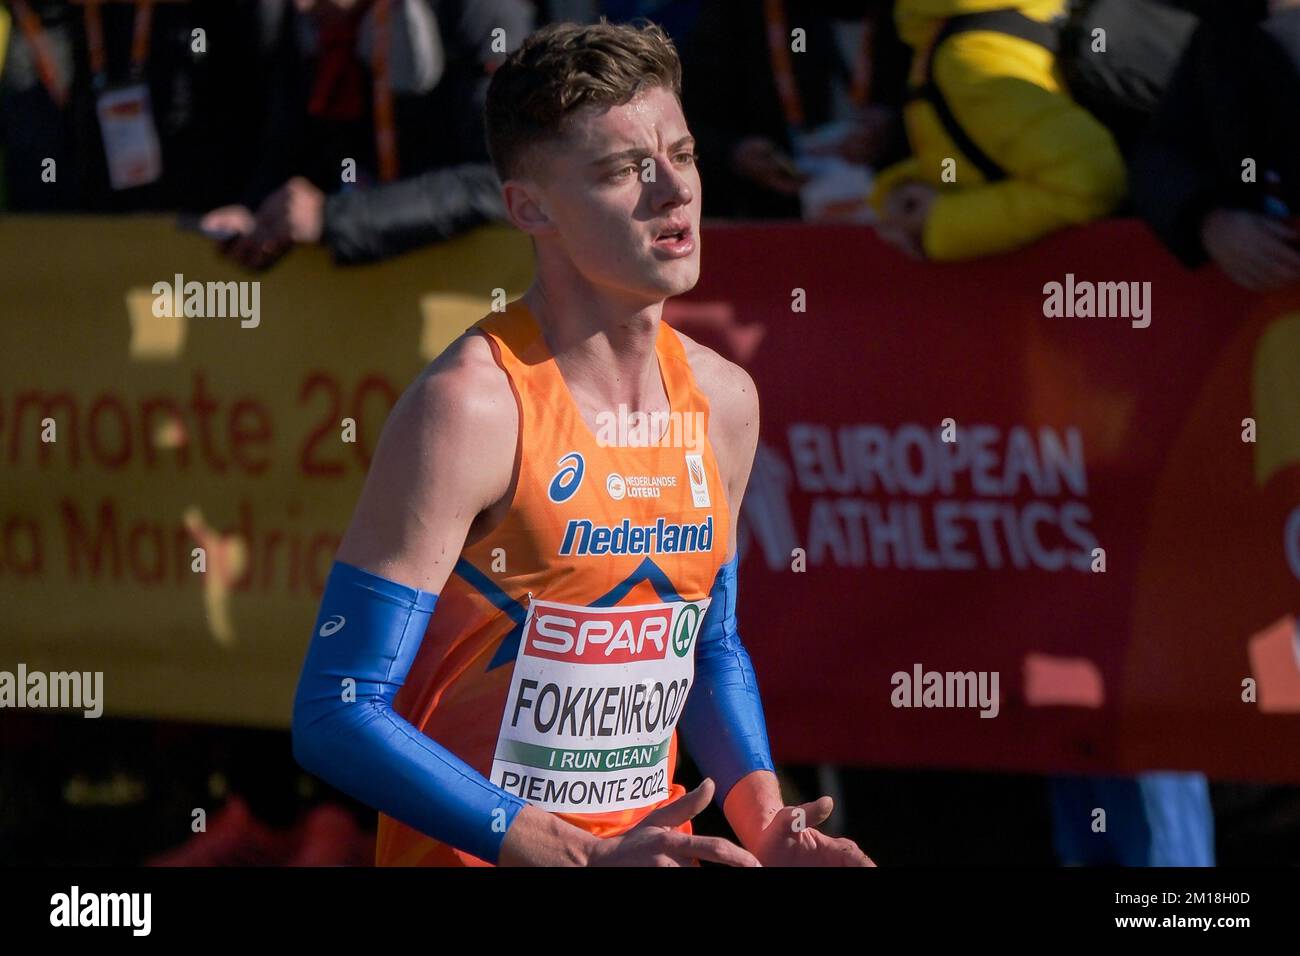 TURIN, ITALY - DECEMBER 11: Jesse Fokkenrood of the Netherlands competing on the U23 Men Race during the European Cross Country Championships on December 11, 2022 in Turin, Italy (Photo by Federico Tardito/BSR Agency) Credit: BSR Agency/Alamy Live News Stock Photo